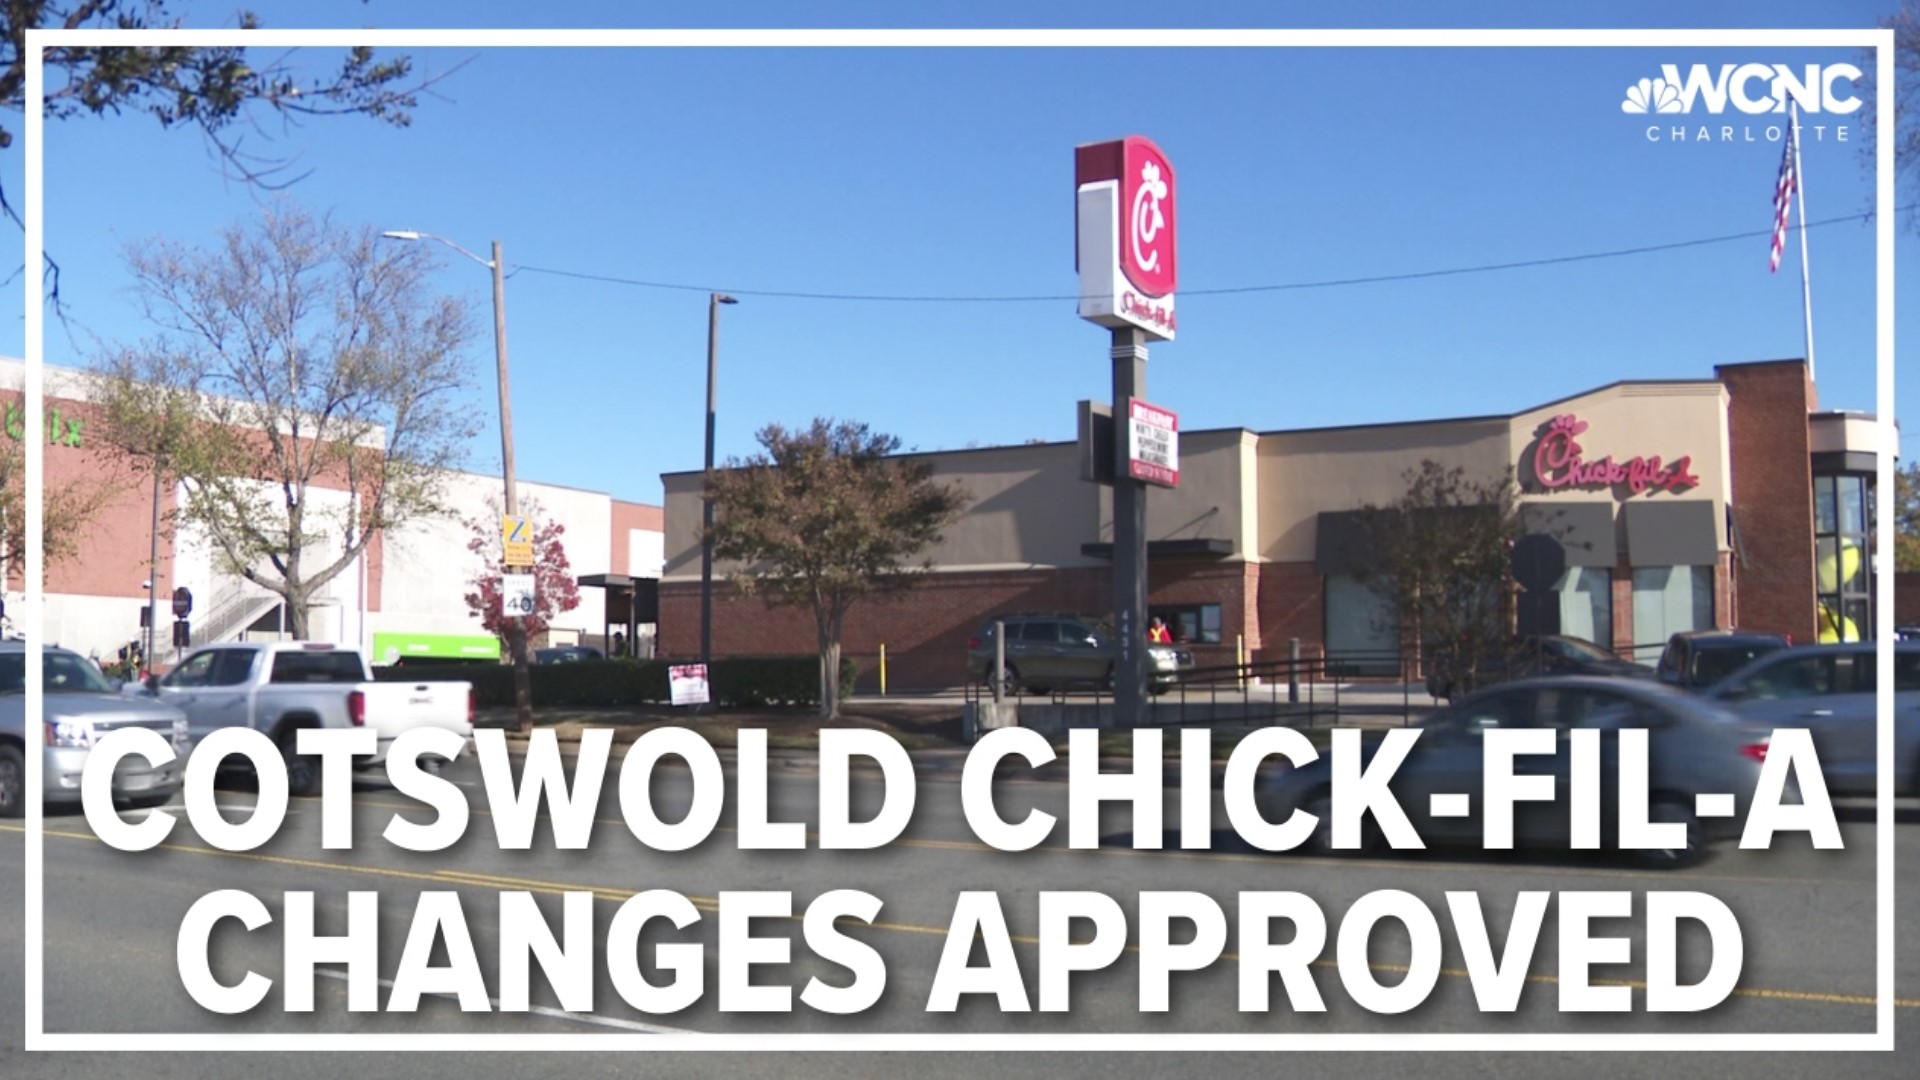 The Cotswold Chick-fil-A got approval from Charlotte City Council for plans to redesign the drive-thru to reduce congestion and improve pedestrian access Tuesday.